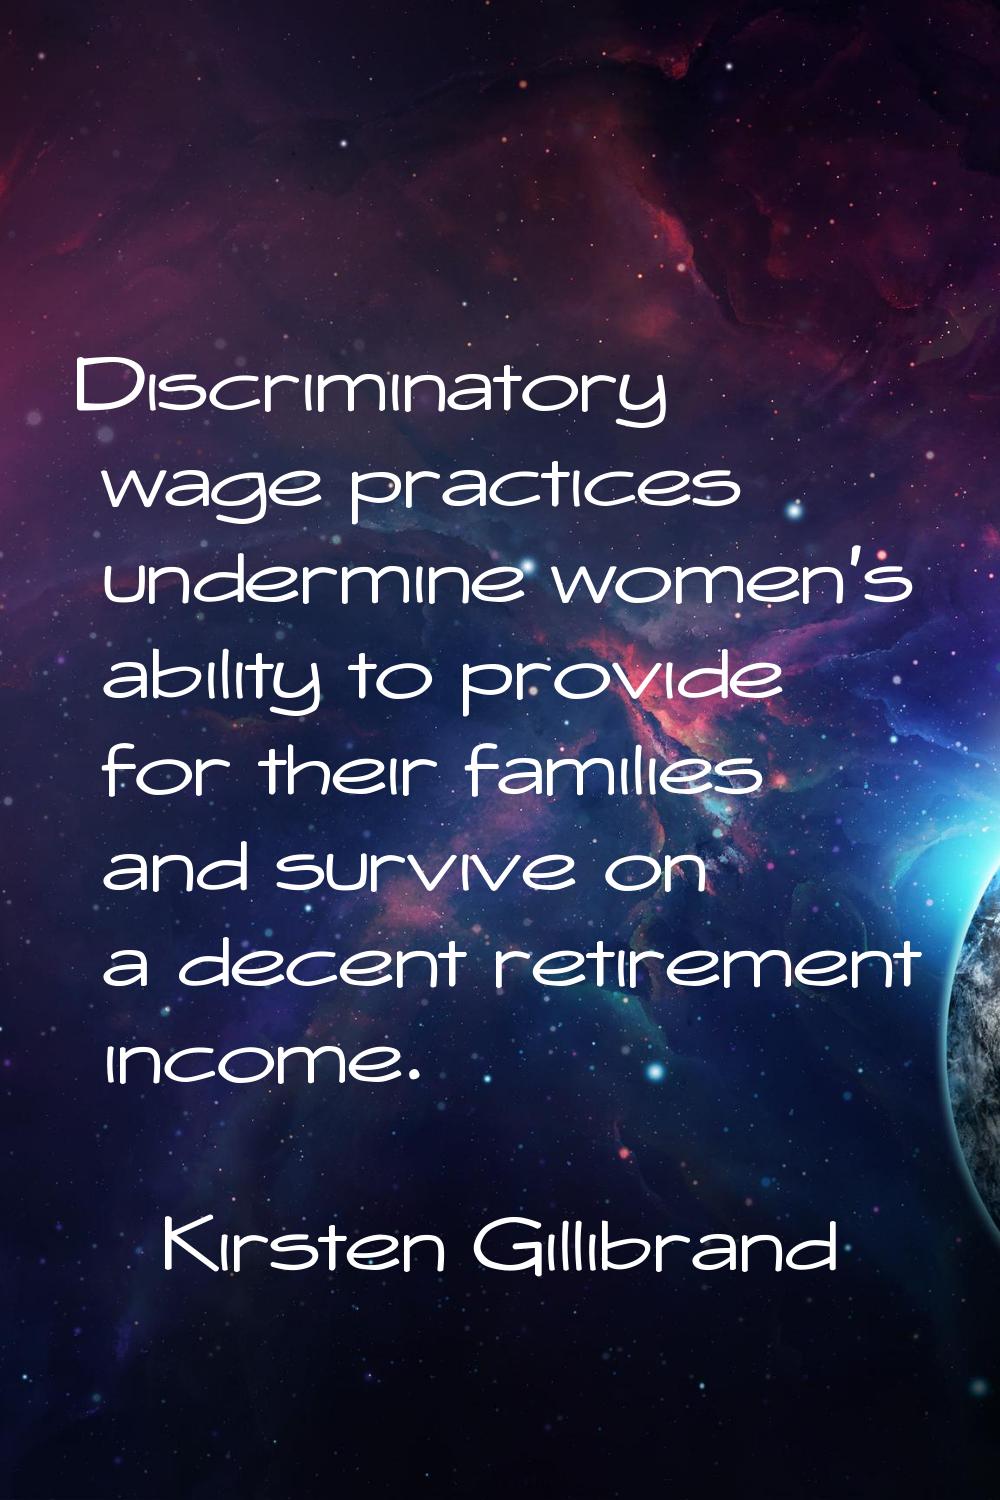 Discriminatory wage practices undermine women's ability to provide for their families and survive o